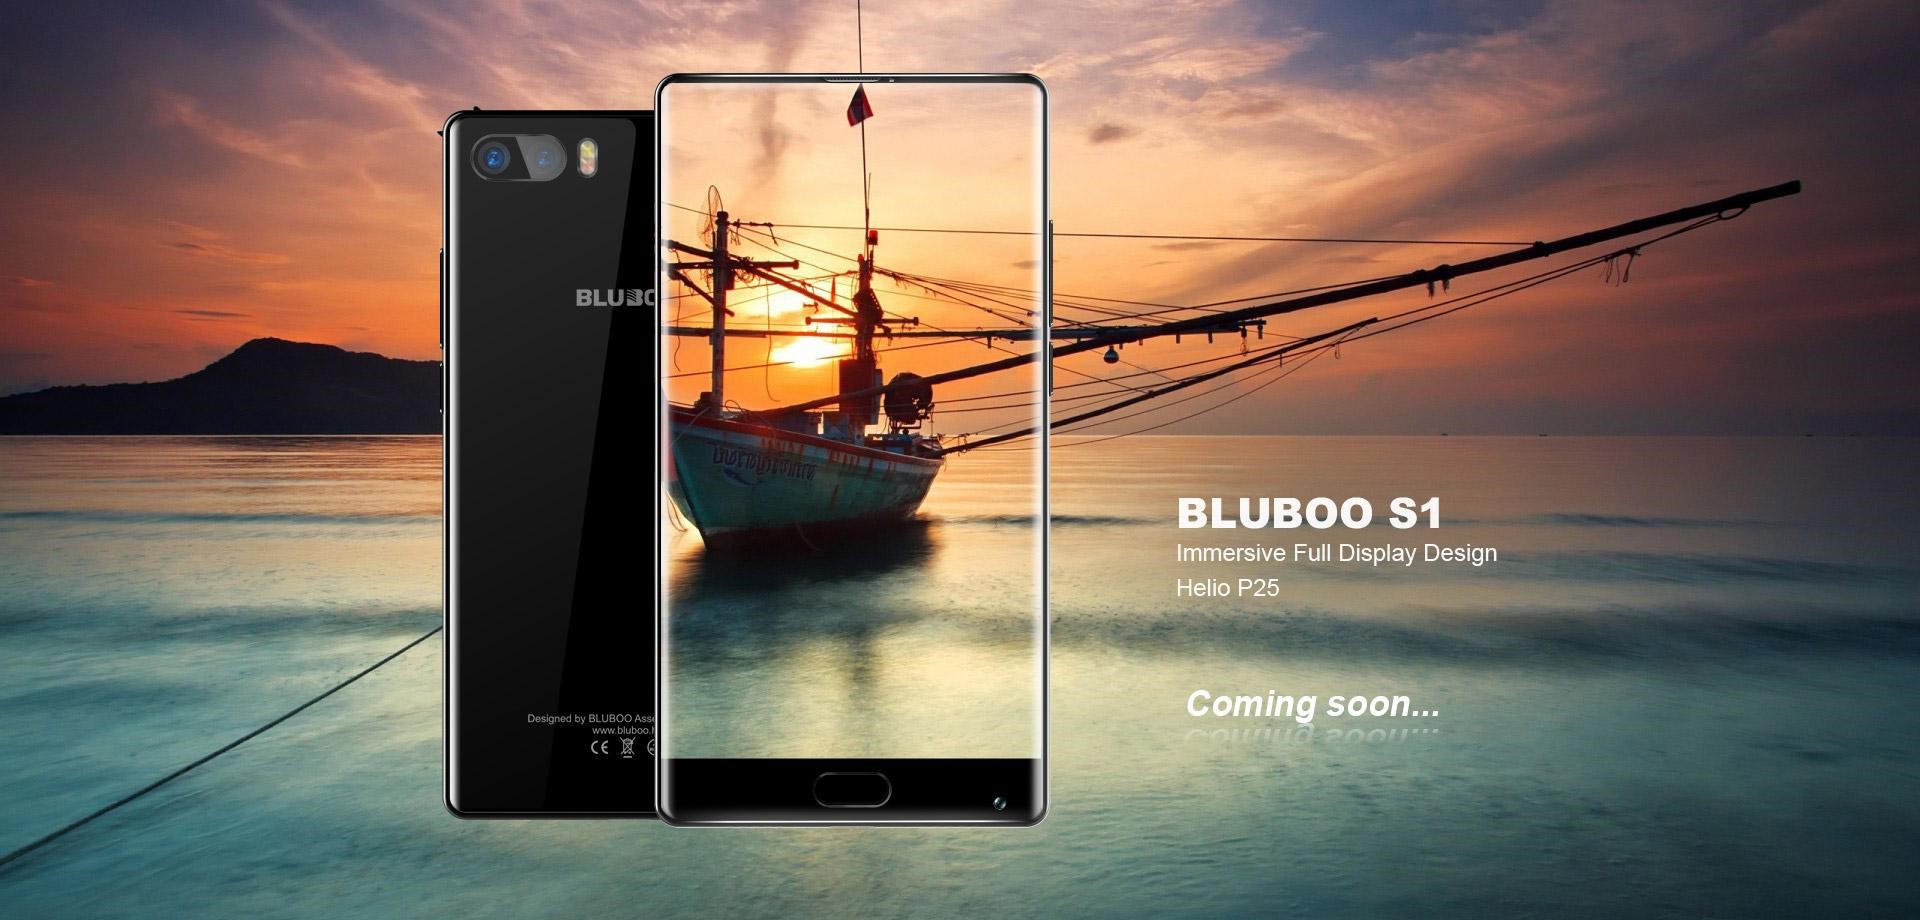 Frameless smartphone BLUBOO S1 you can obtain free